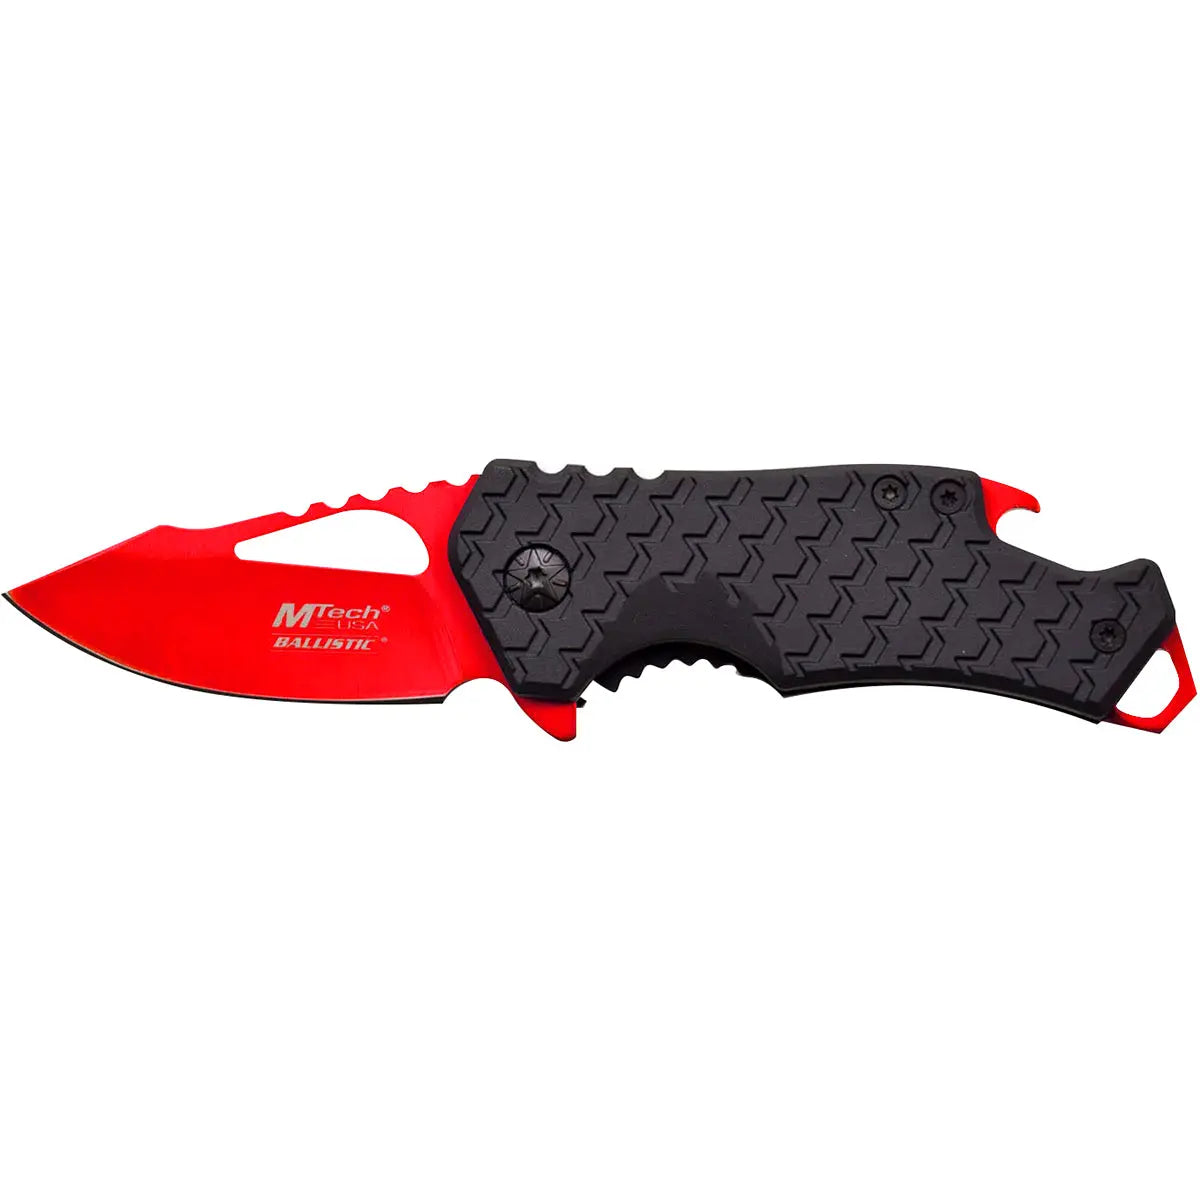 MTech USA Framelock Spring Assisted Folding Knife, 2.25" Red Blade, MT-A882RD M-Tech